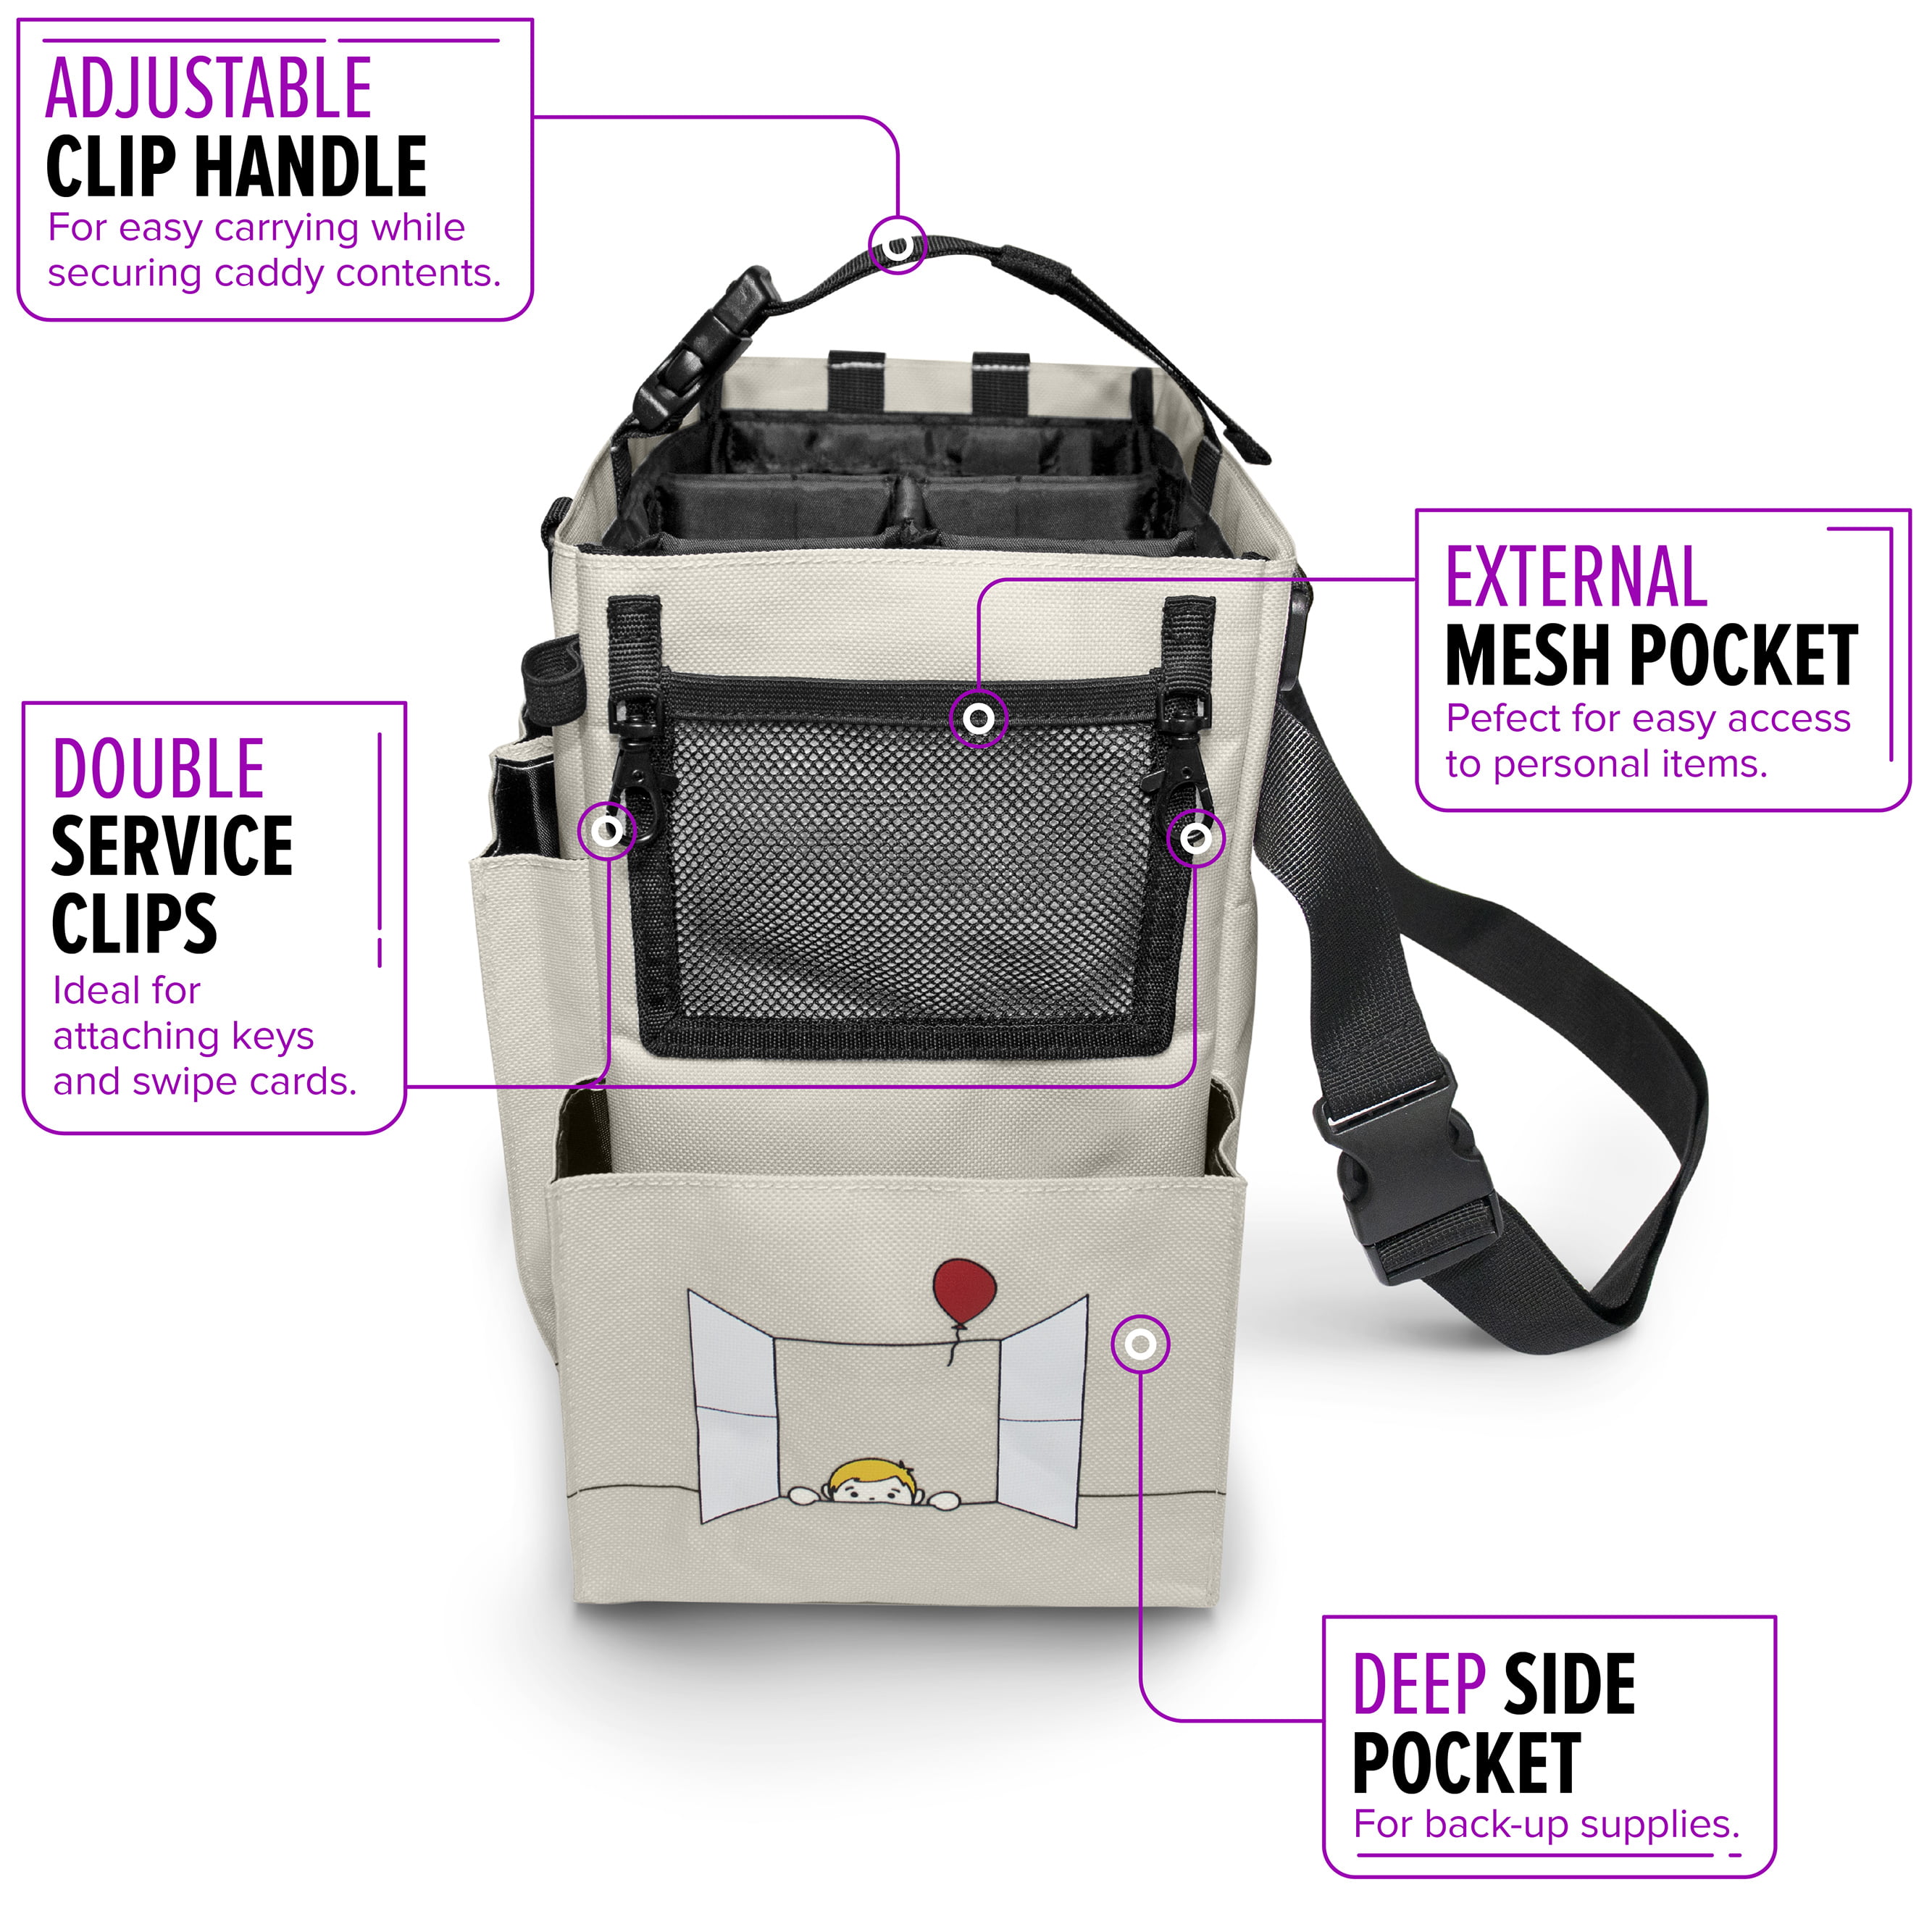 Wearable Cleaning Caddy: Beige Floral – FifthStart